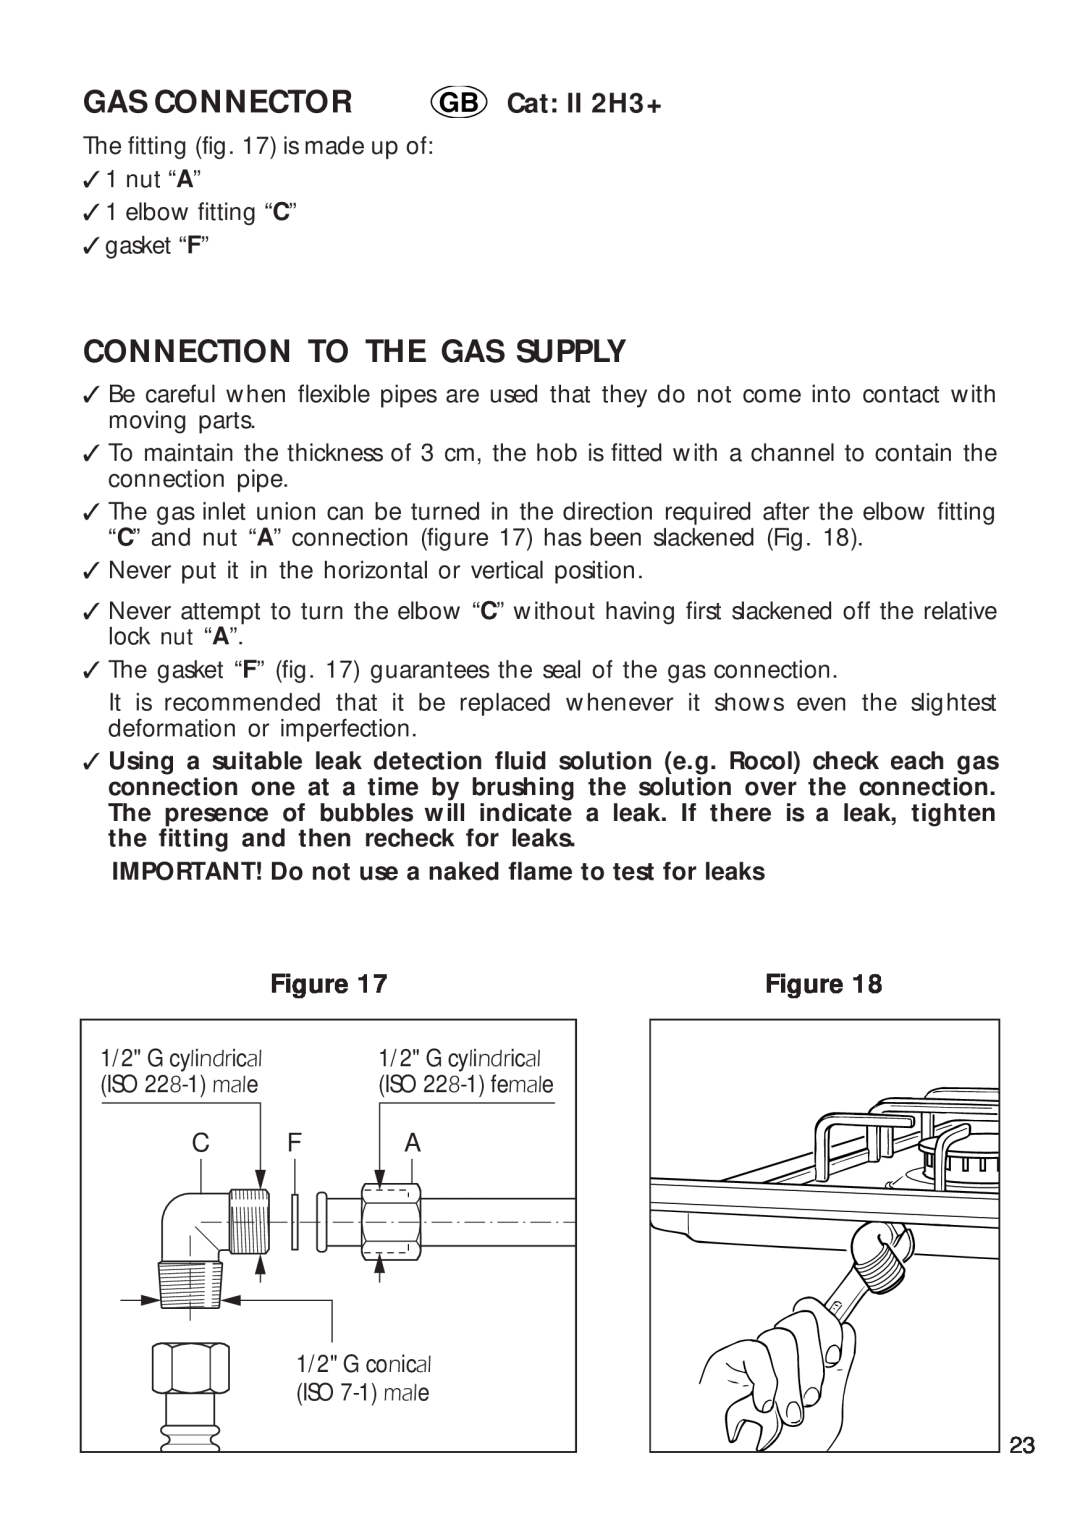 CDA HCG 730, HCG 740 installation instructions Connection To The Gas Supply, Gas Connector, GB Cat: II 2H3+ 